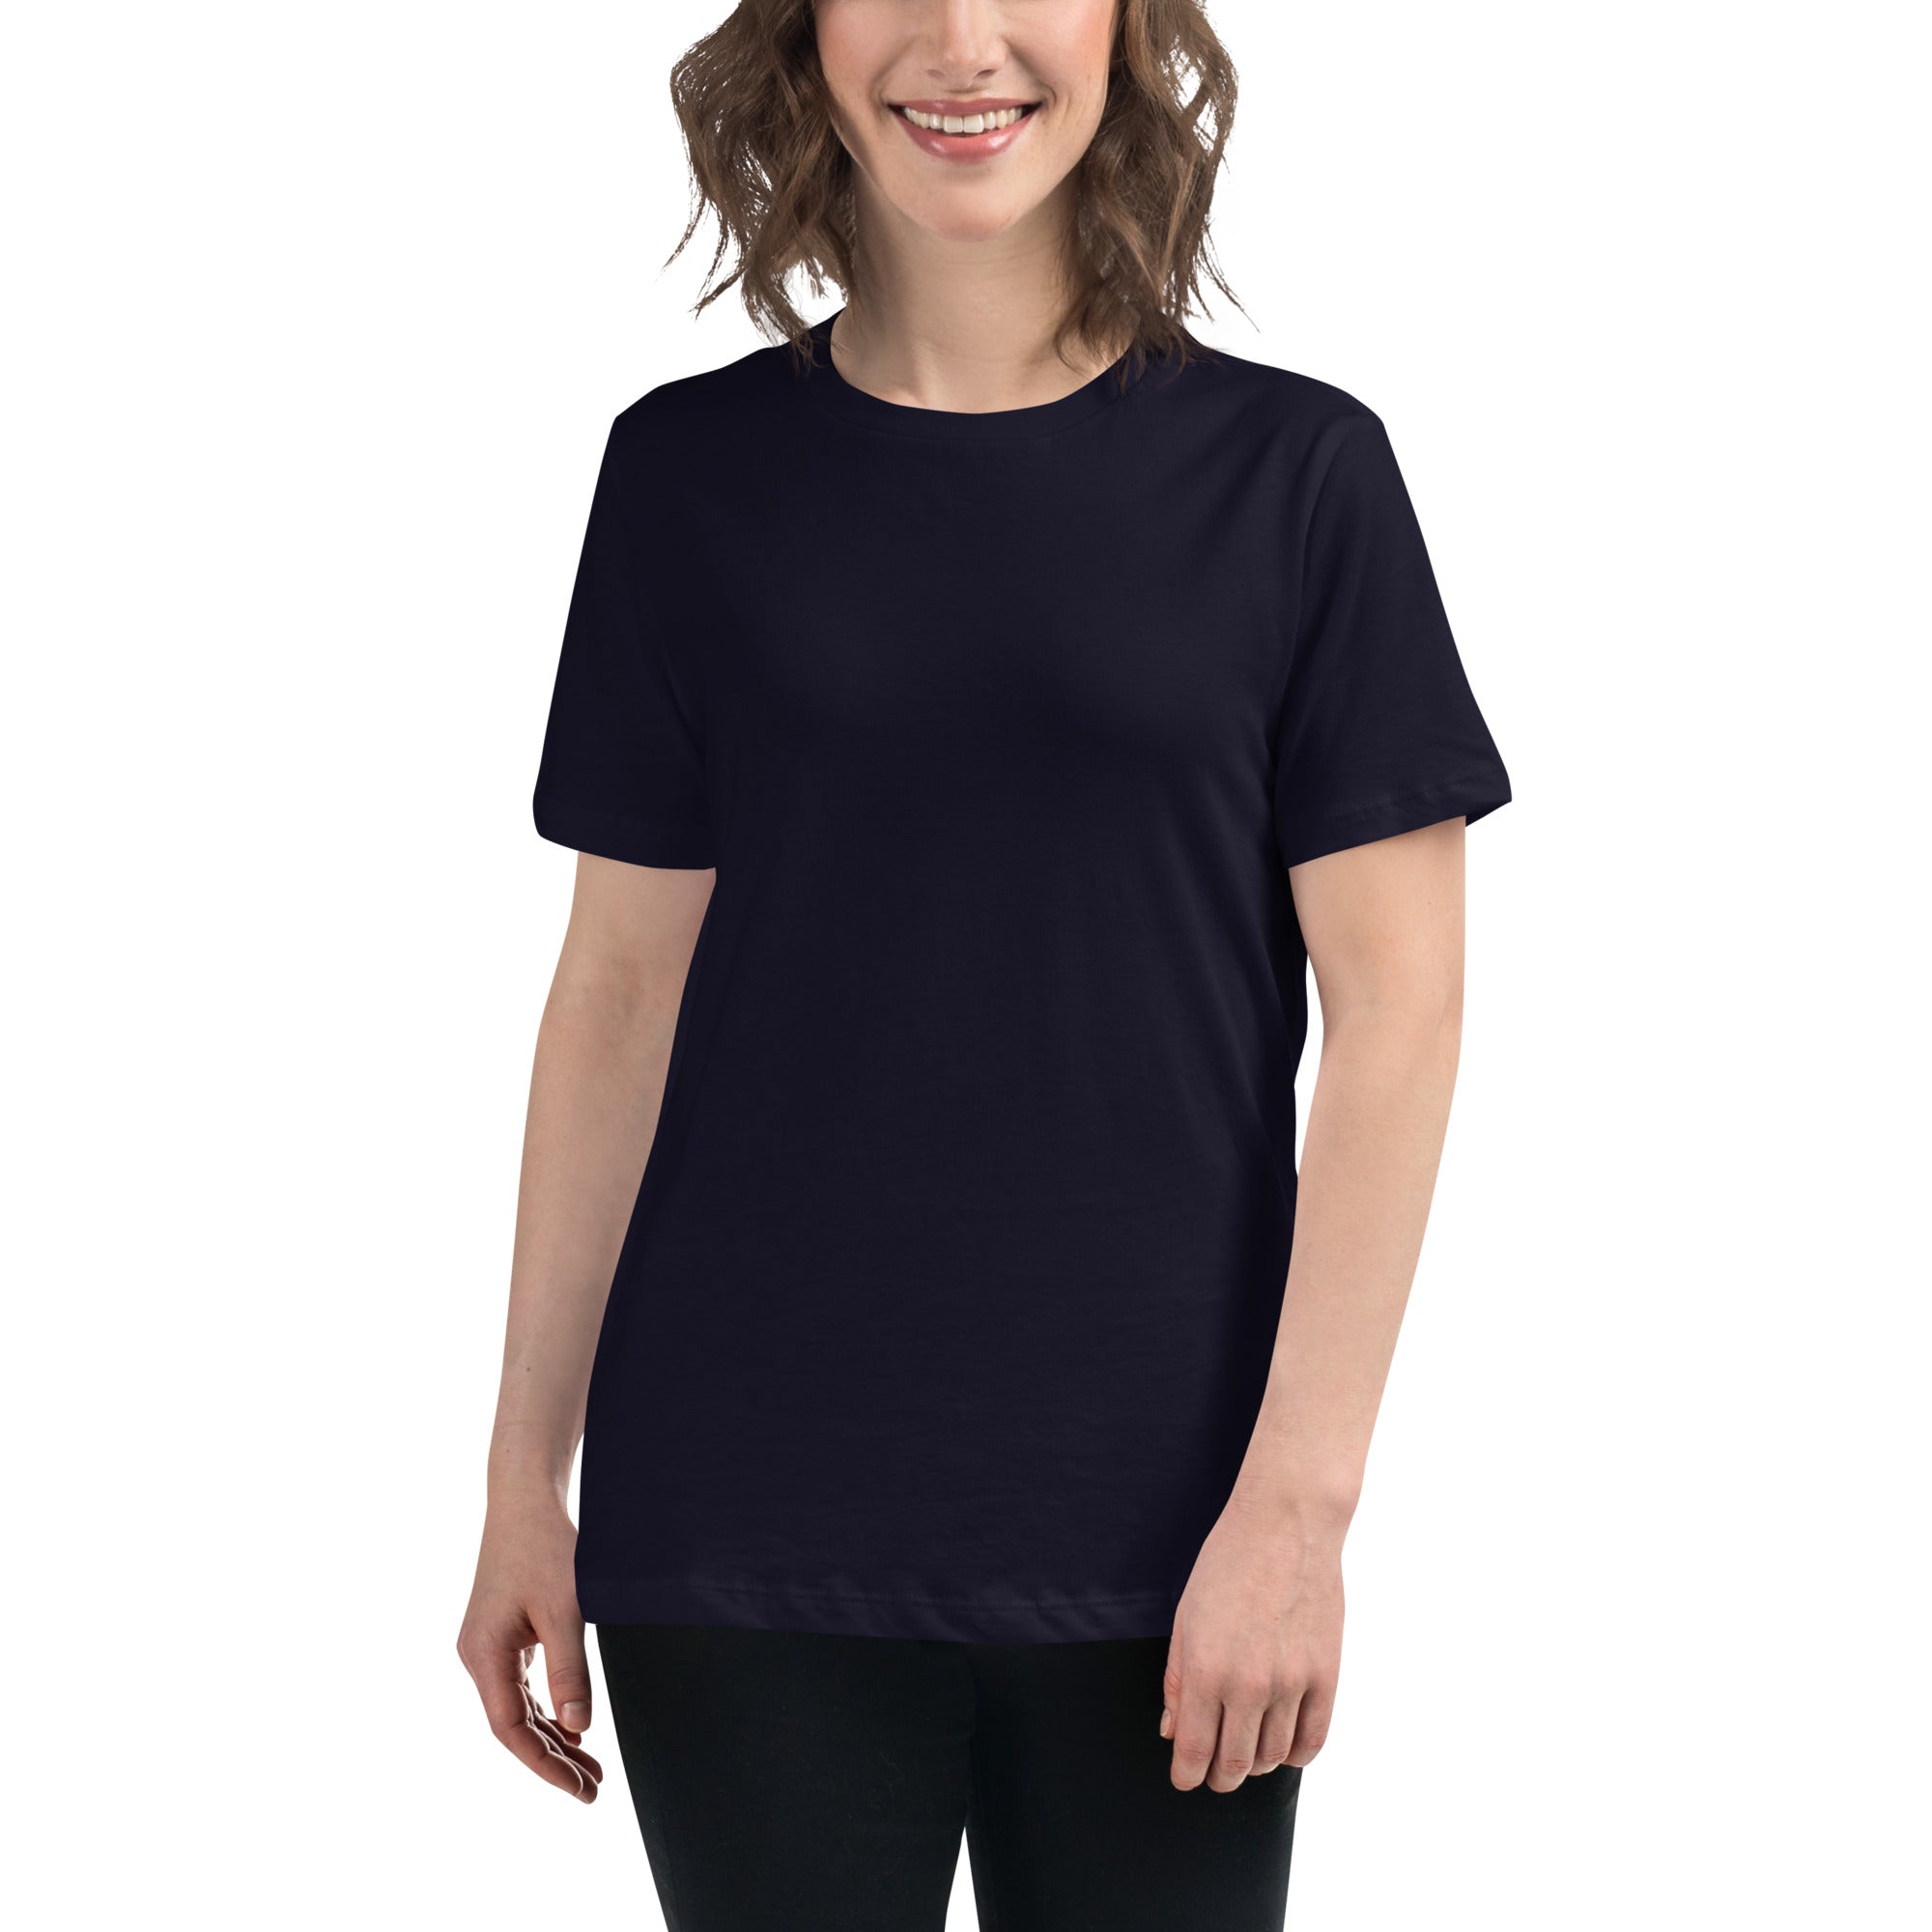 Sounds of country-Women's Relaxed T-Shirt